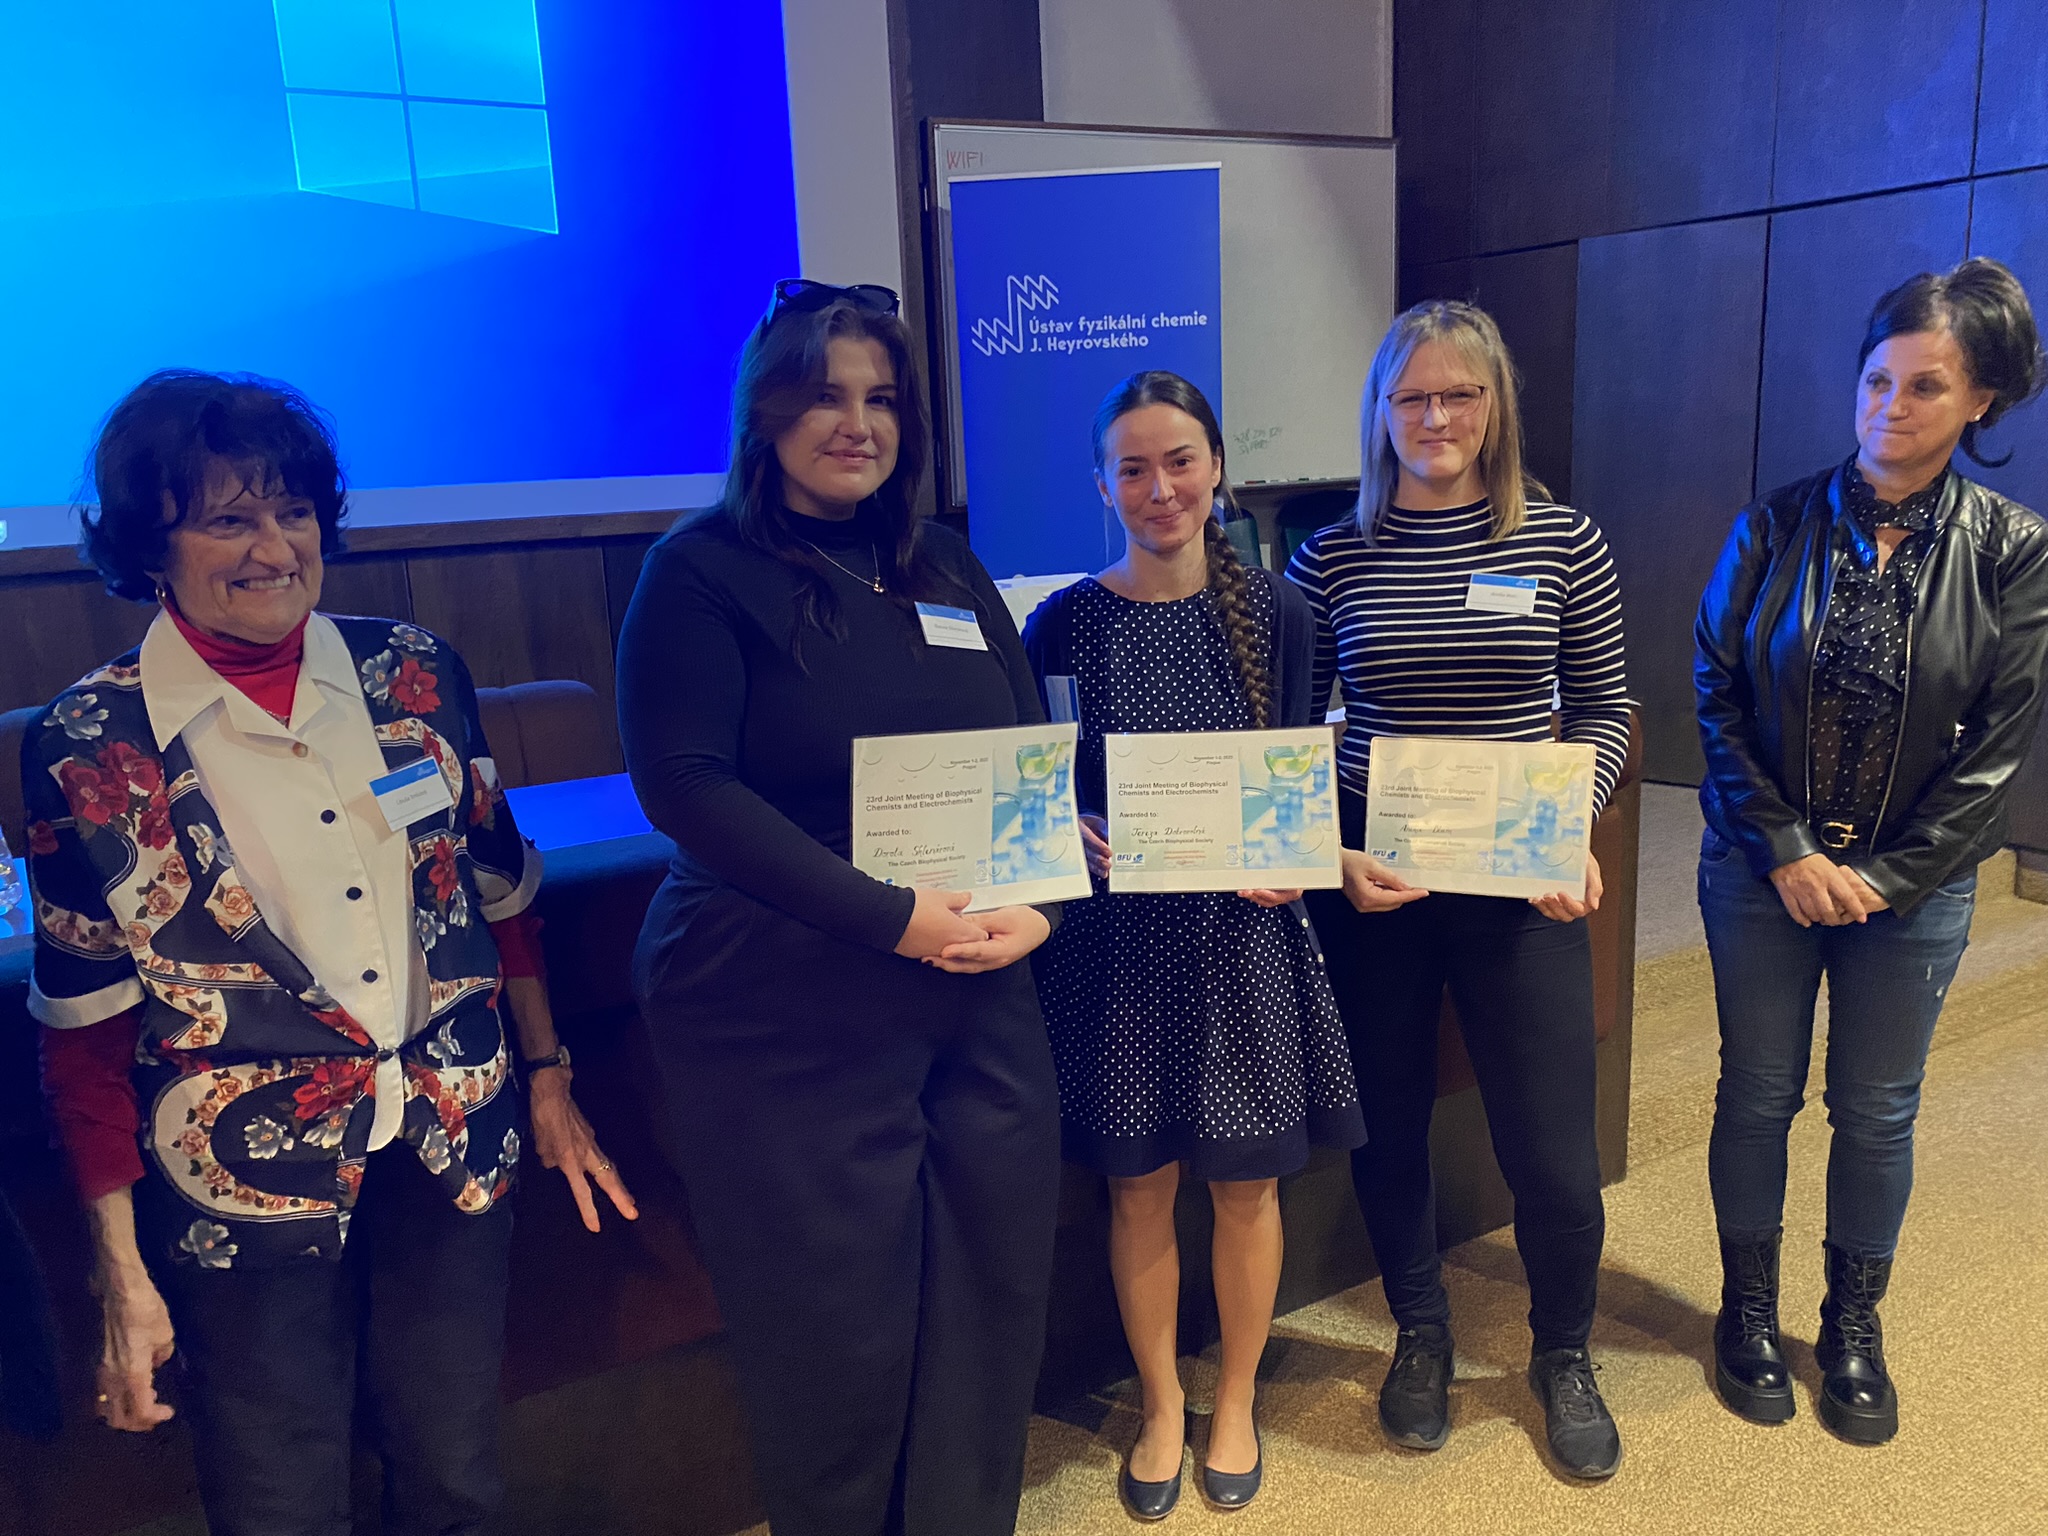 The winners of the competition for the best flash talk presentation awarded by the Czech Biophysical association and Czech Chemical Society: Anika Blum, Terezie Dobrovoln√°, Dorota Sklen√°rov√°